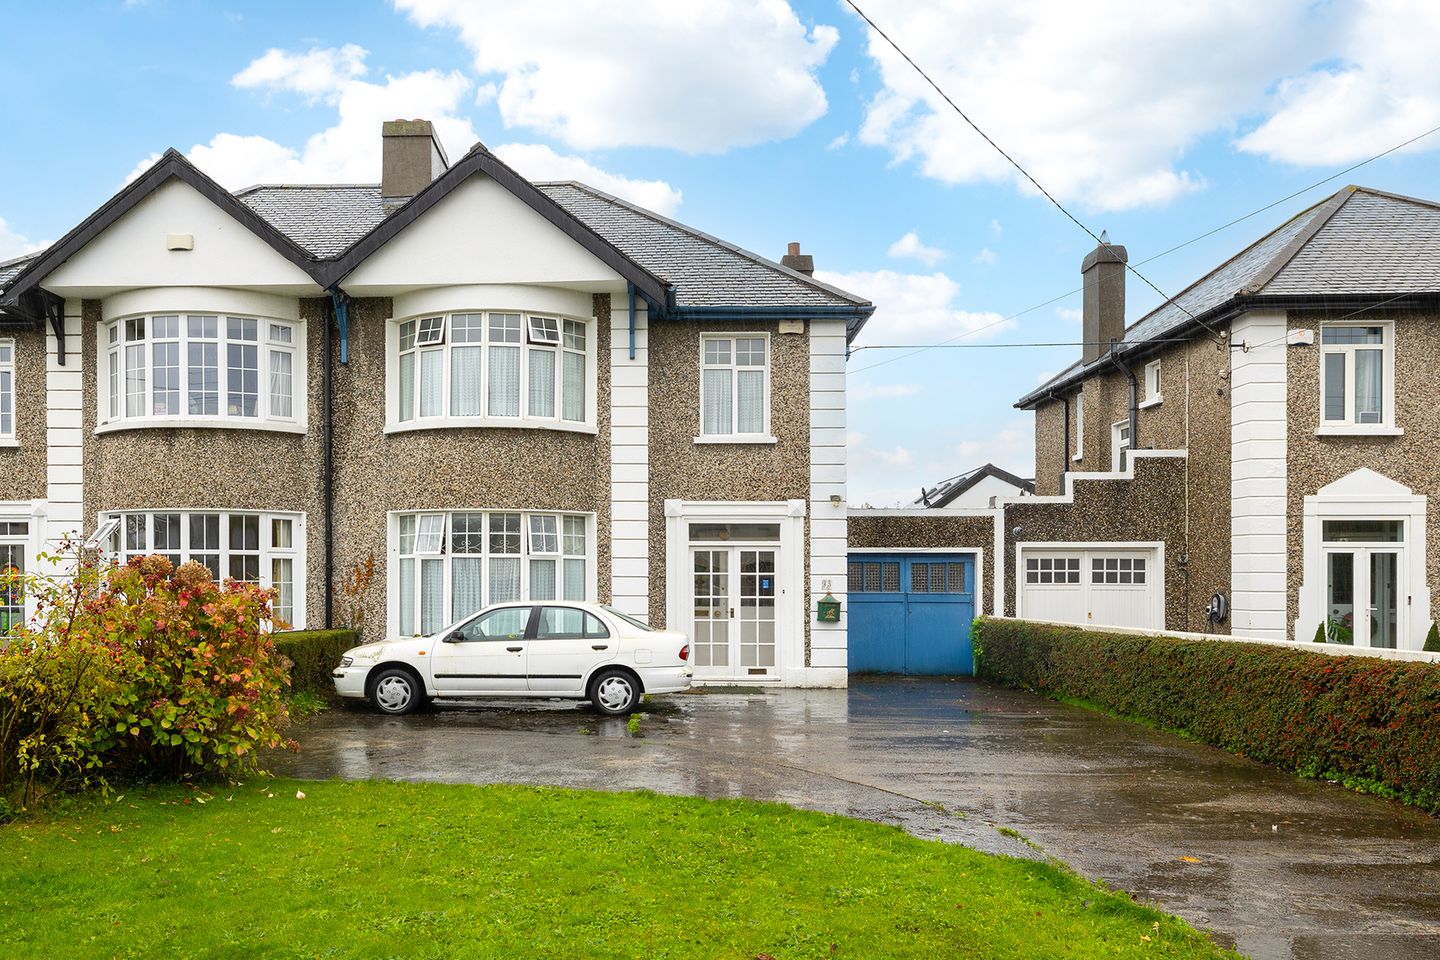 93 Kimmage Road West, Kimmage, Dublin 12, D12HT26